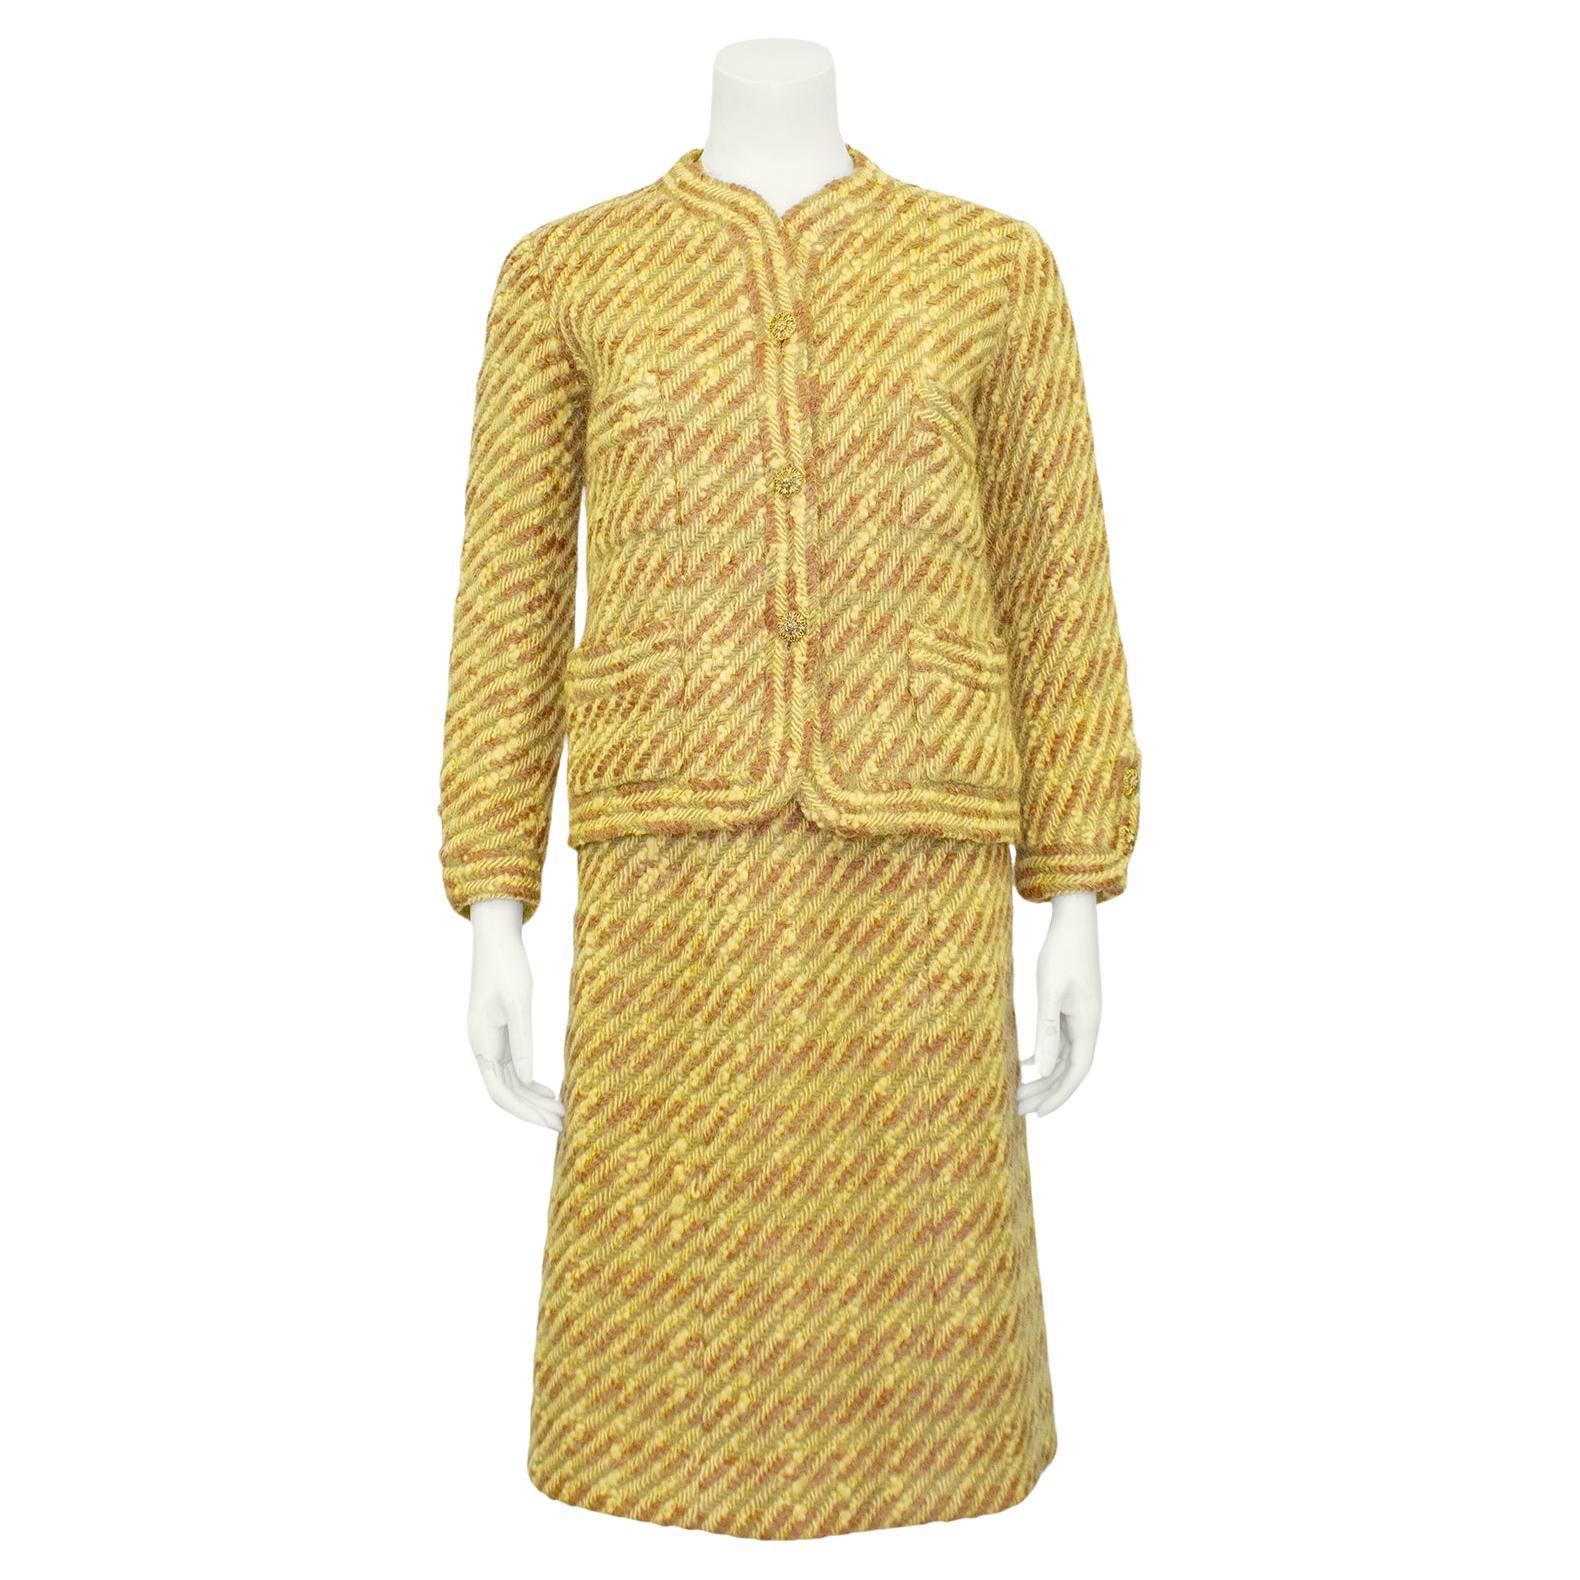 1960s Chanel Haute Couture Gold and Brown Jacket and Dress Ensemble For Sale